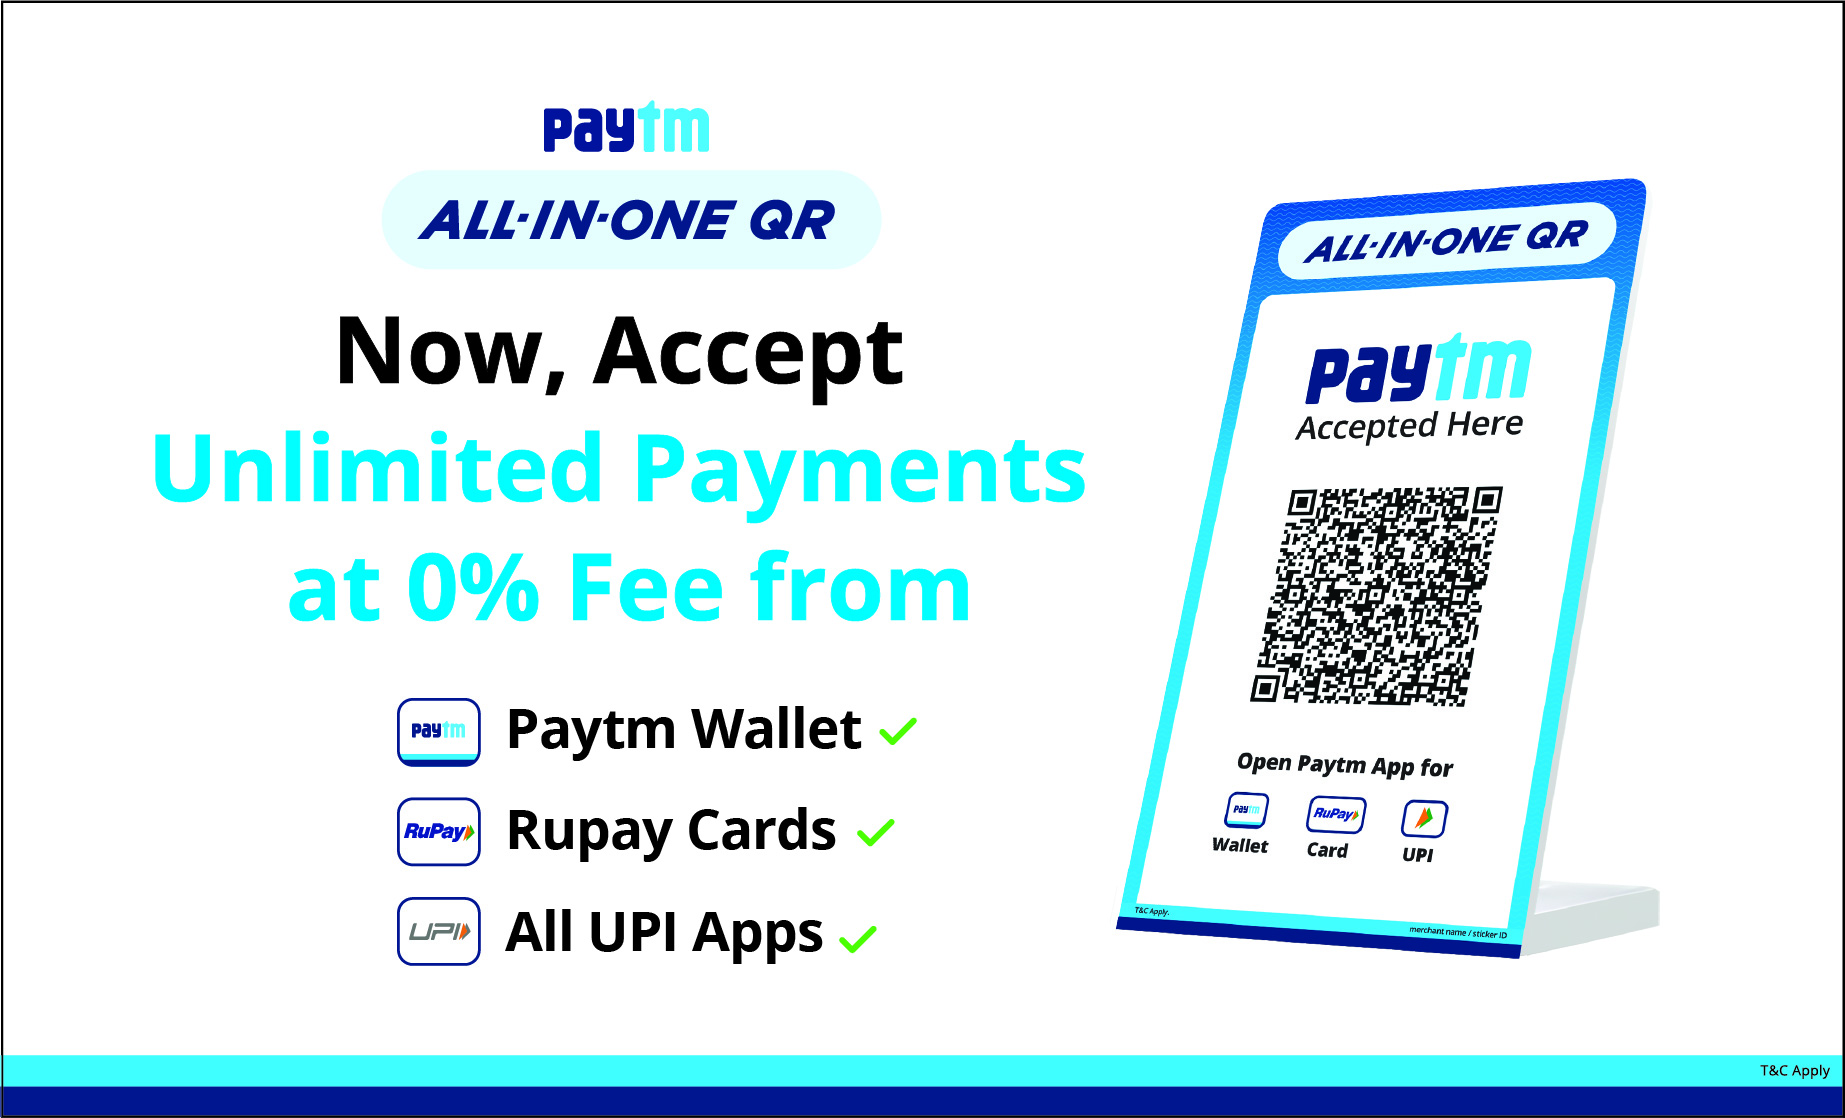 paytm-launches-all-in-one-qr-for-merchants-with-unlimited-payments-at-0-fee